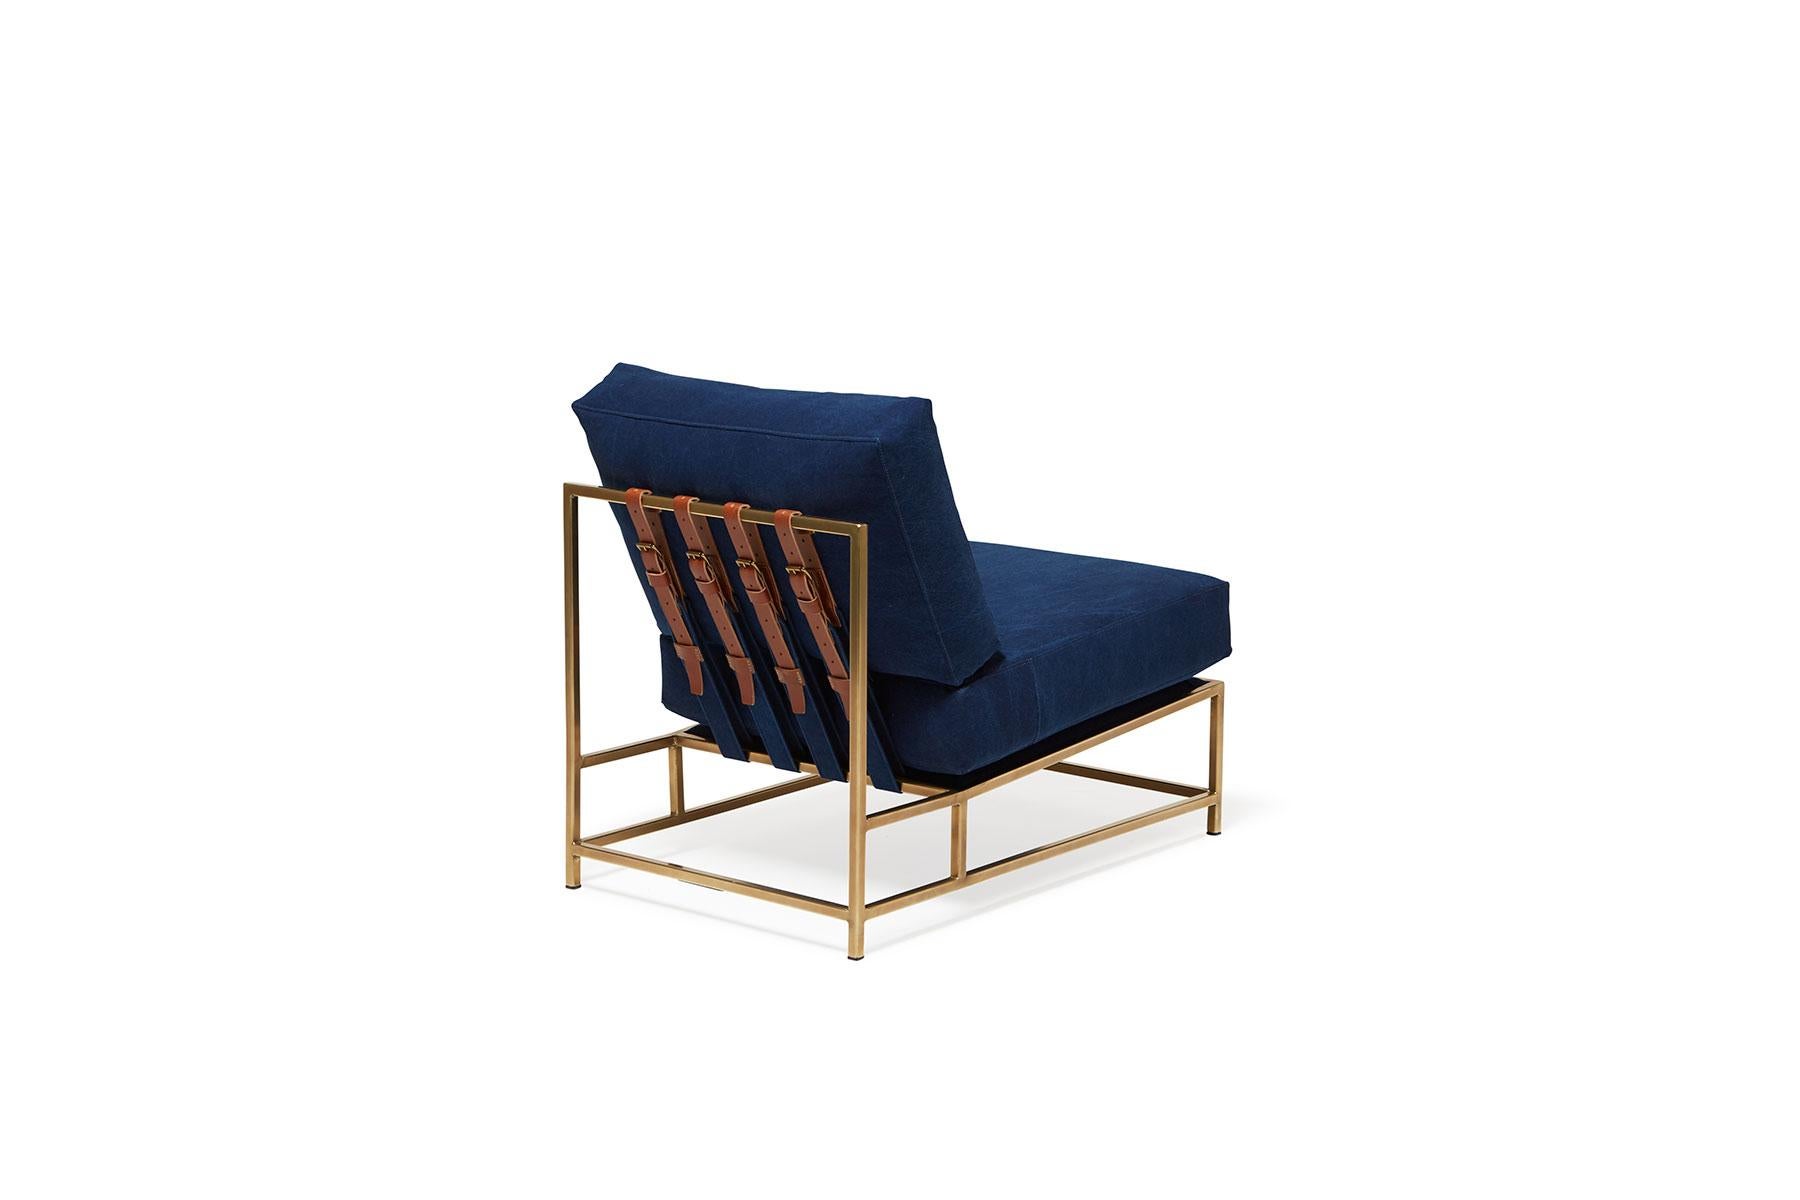 American Hand-Dyed Indigo Canvas & Tarnished Brass Chair For Sale